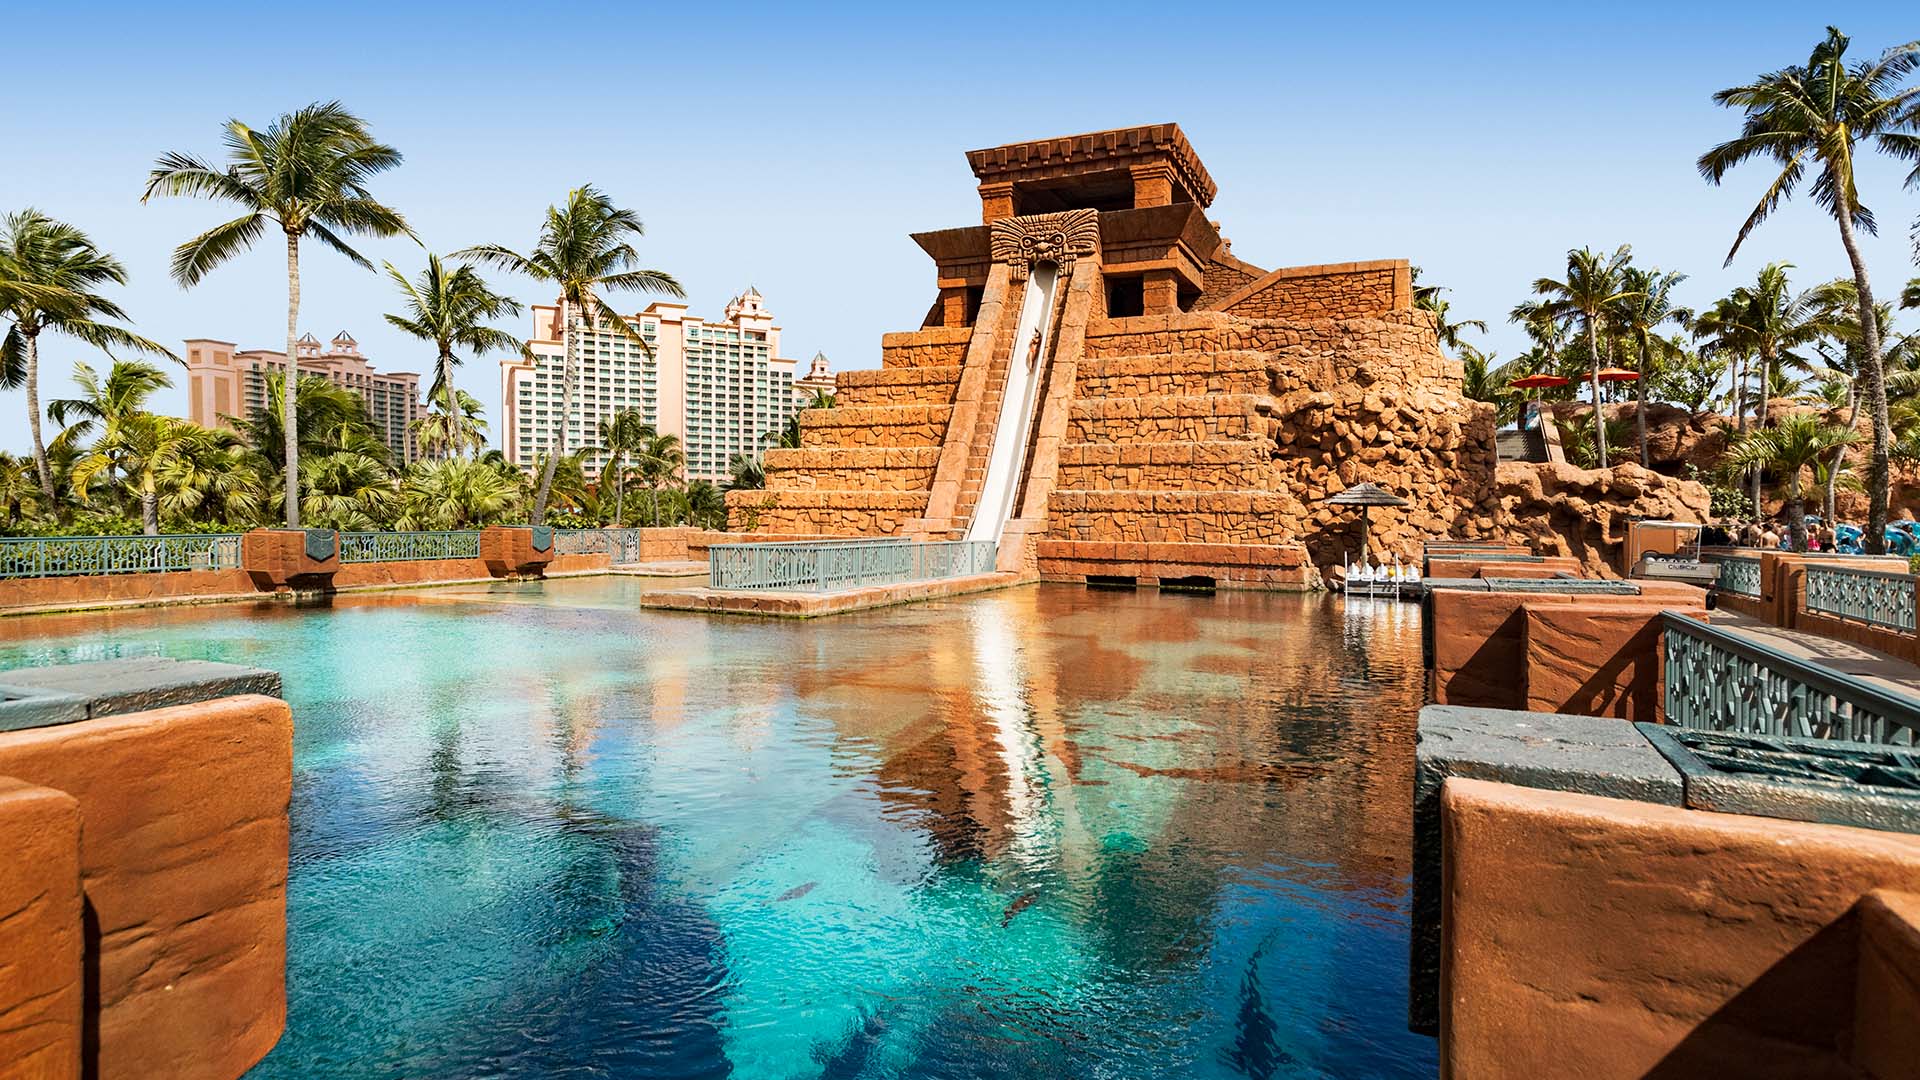 Make a Splash at Any Age at These 11 Resorts with Water Parks